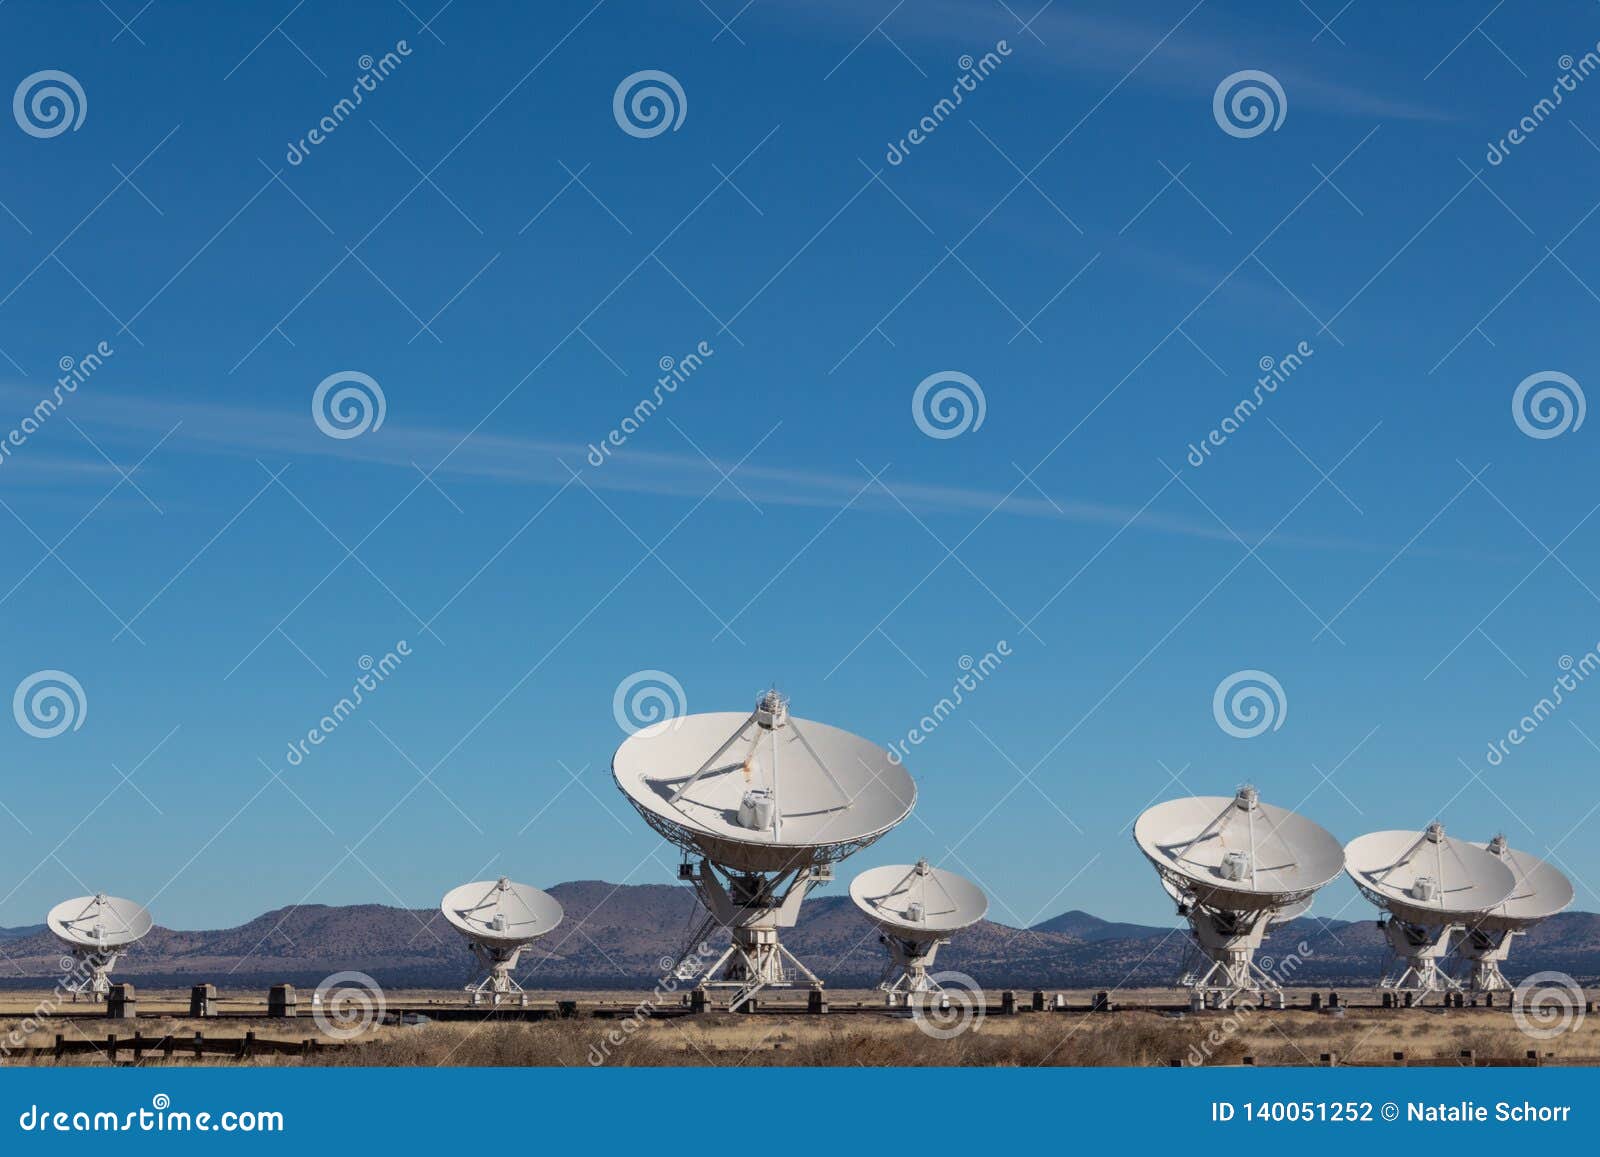 very large array grouping of radio antenna dishes in new mexico desert, blue sky